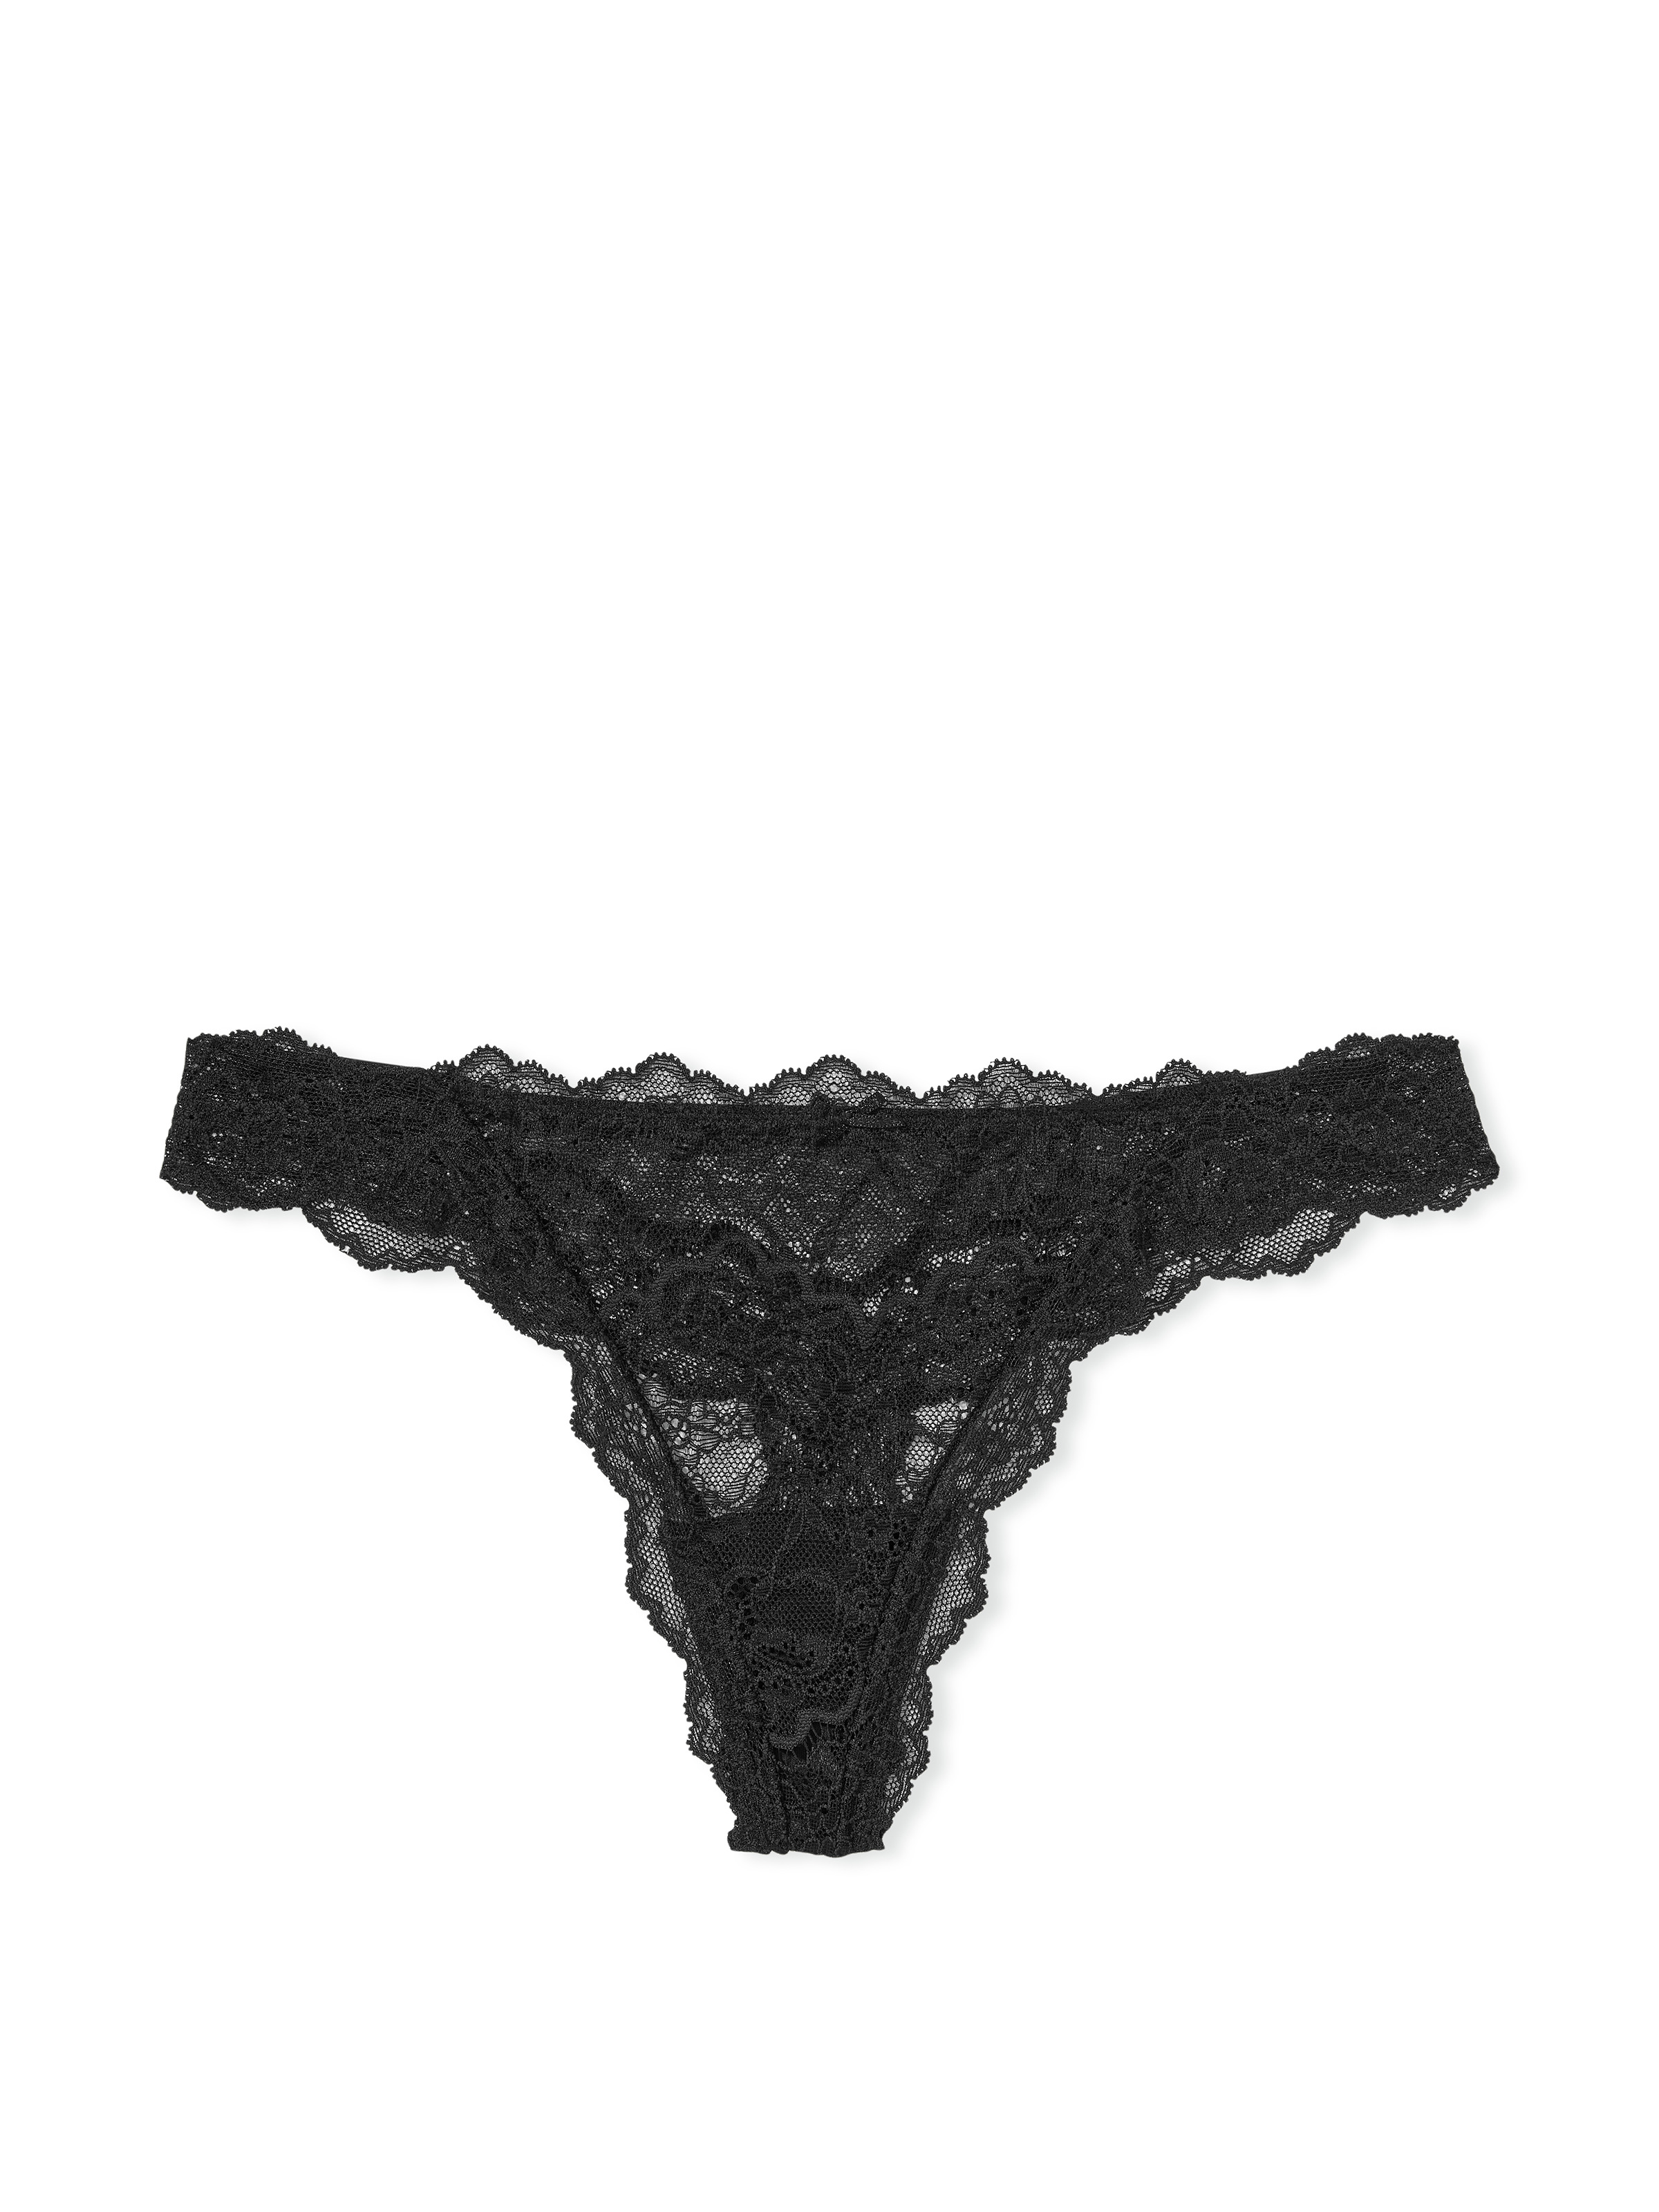 Floral Lace Thong Panty image number null